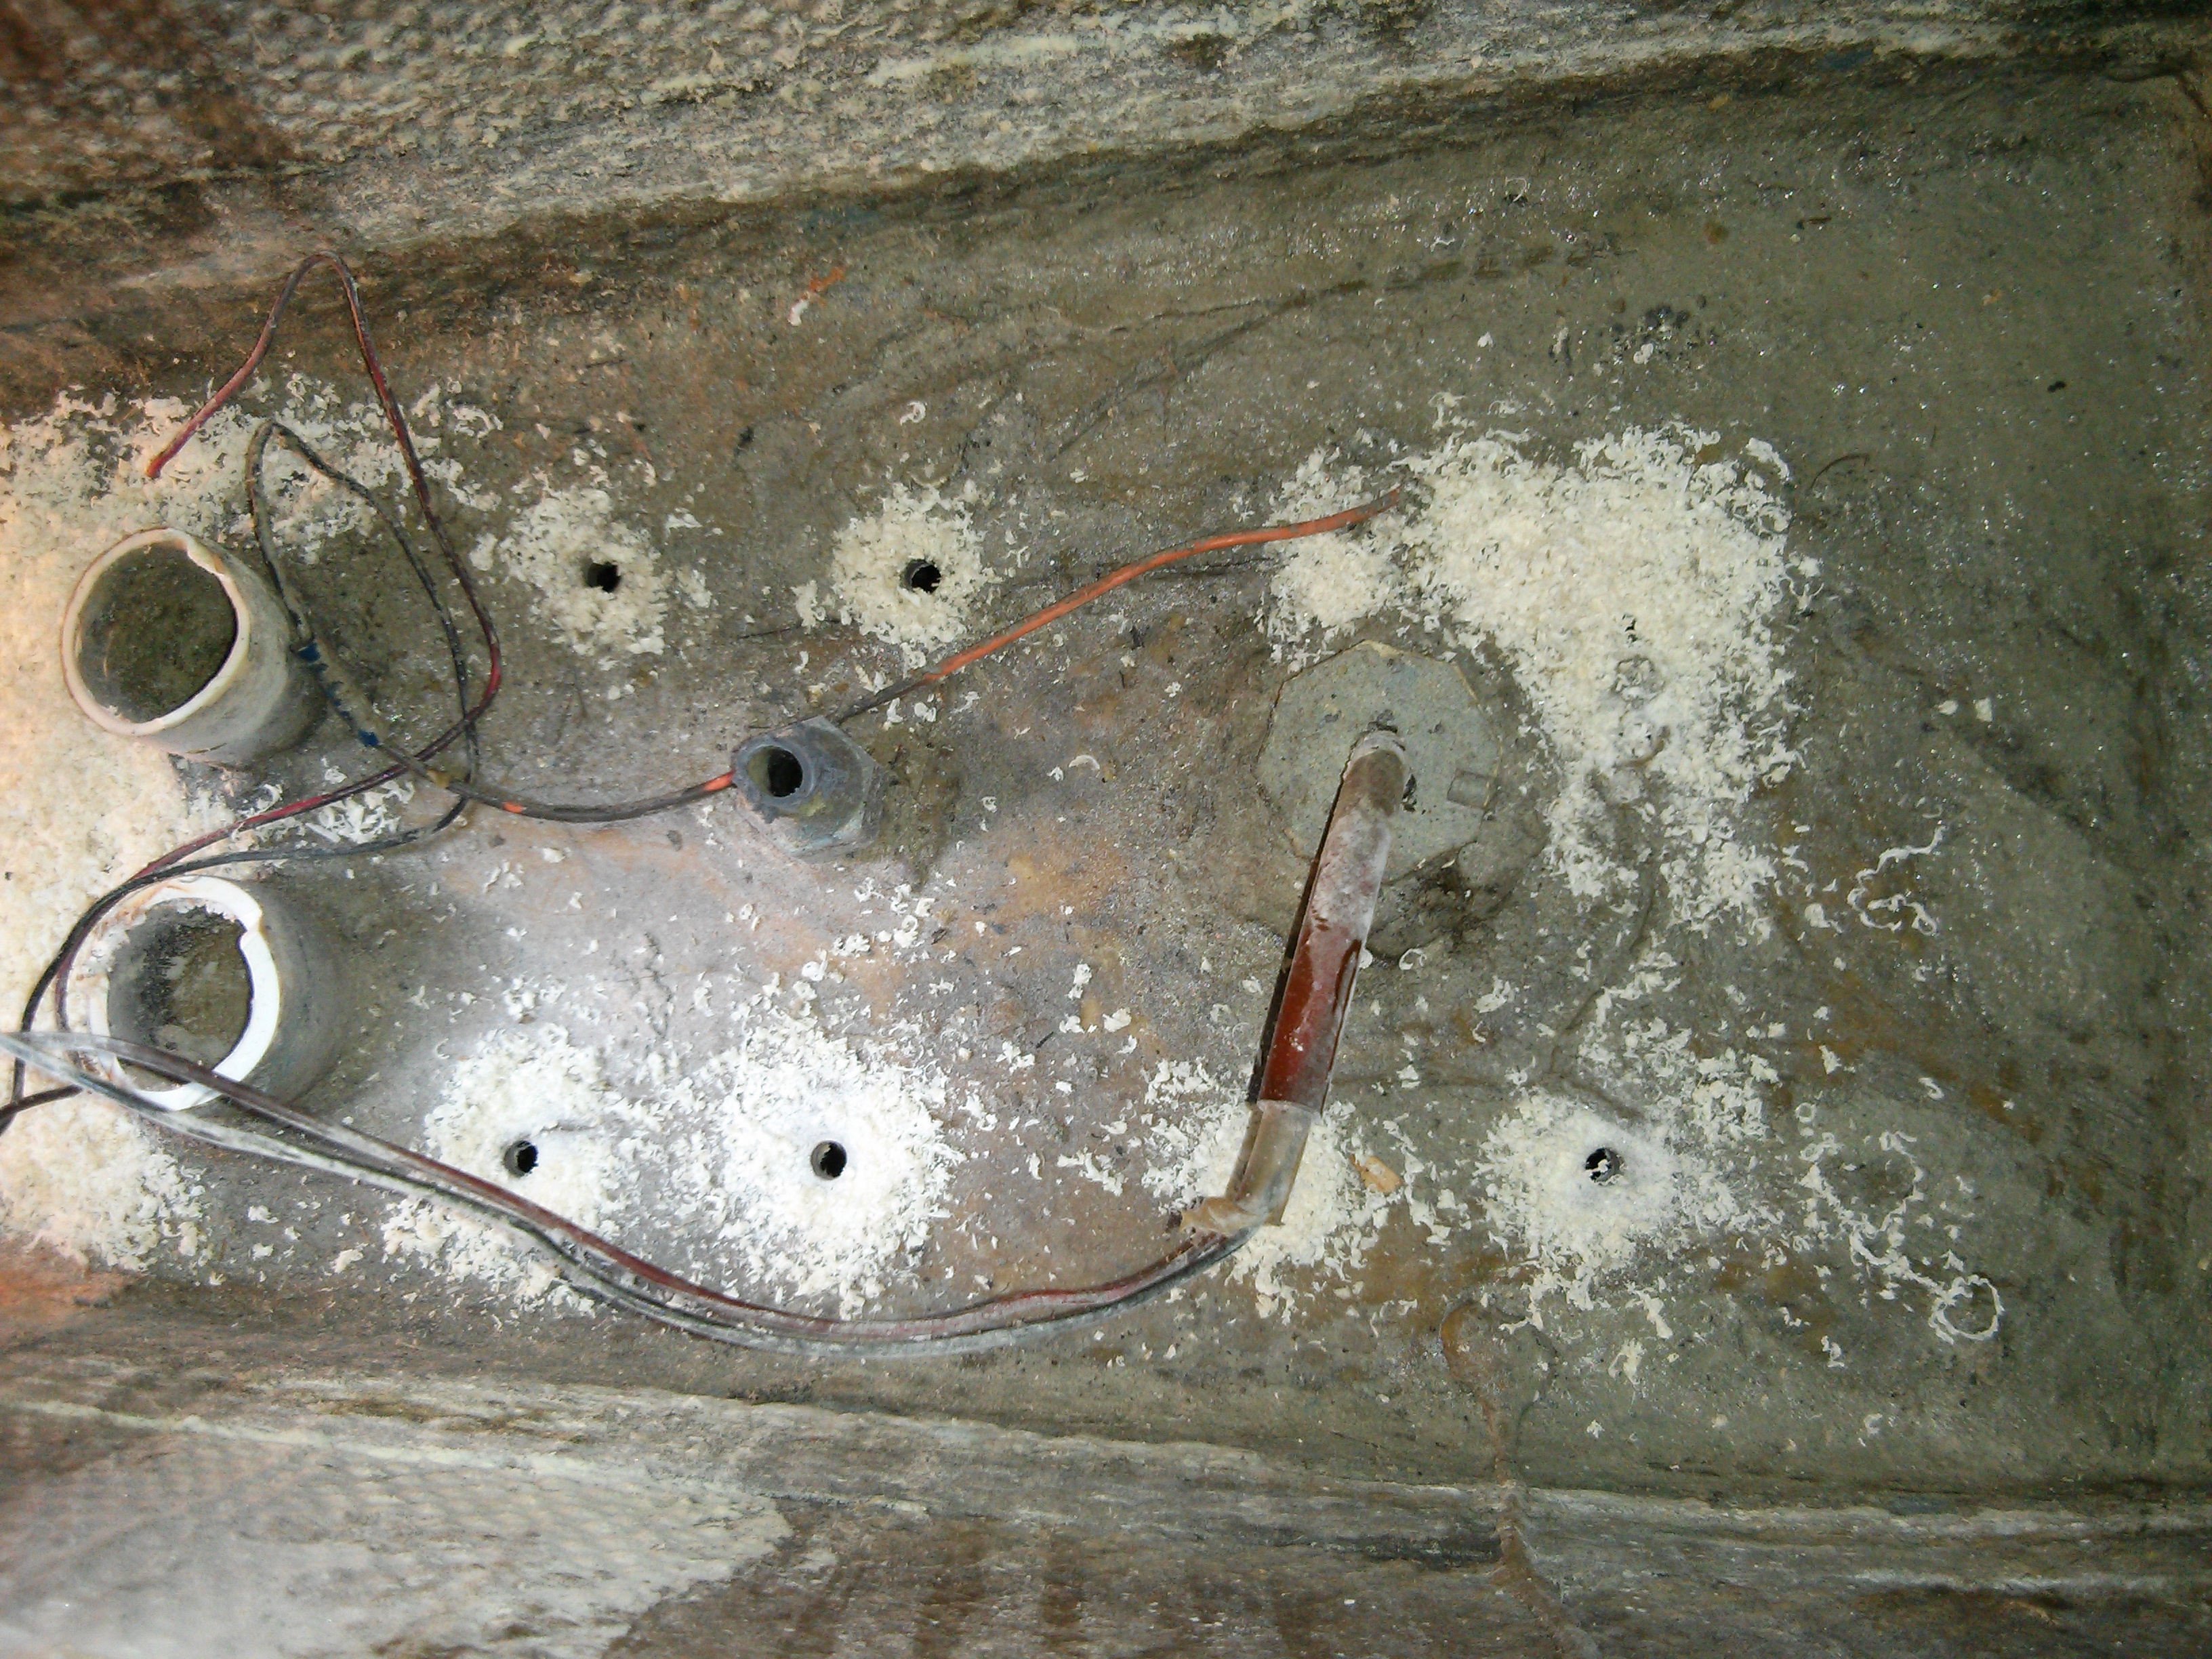 Removing a Portion of the Bilge Floor